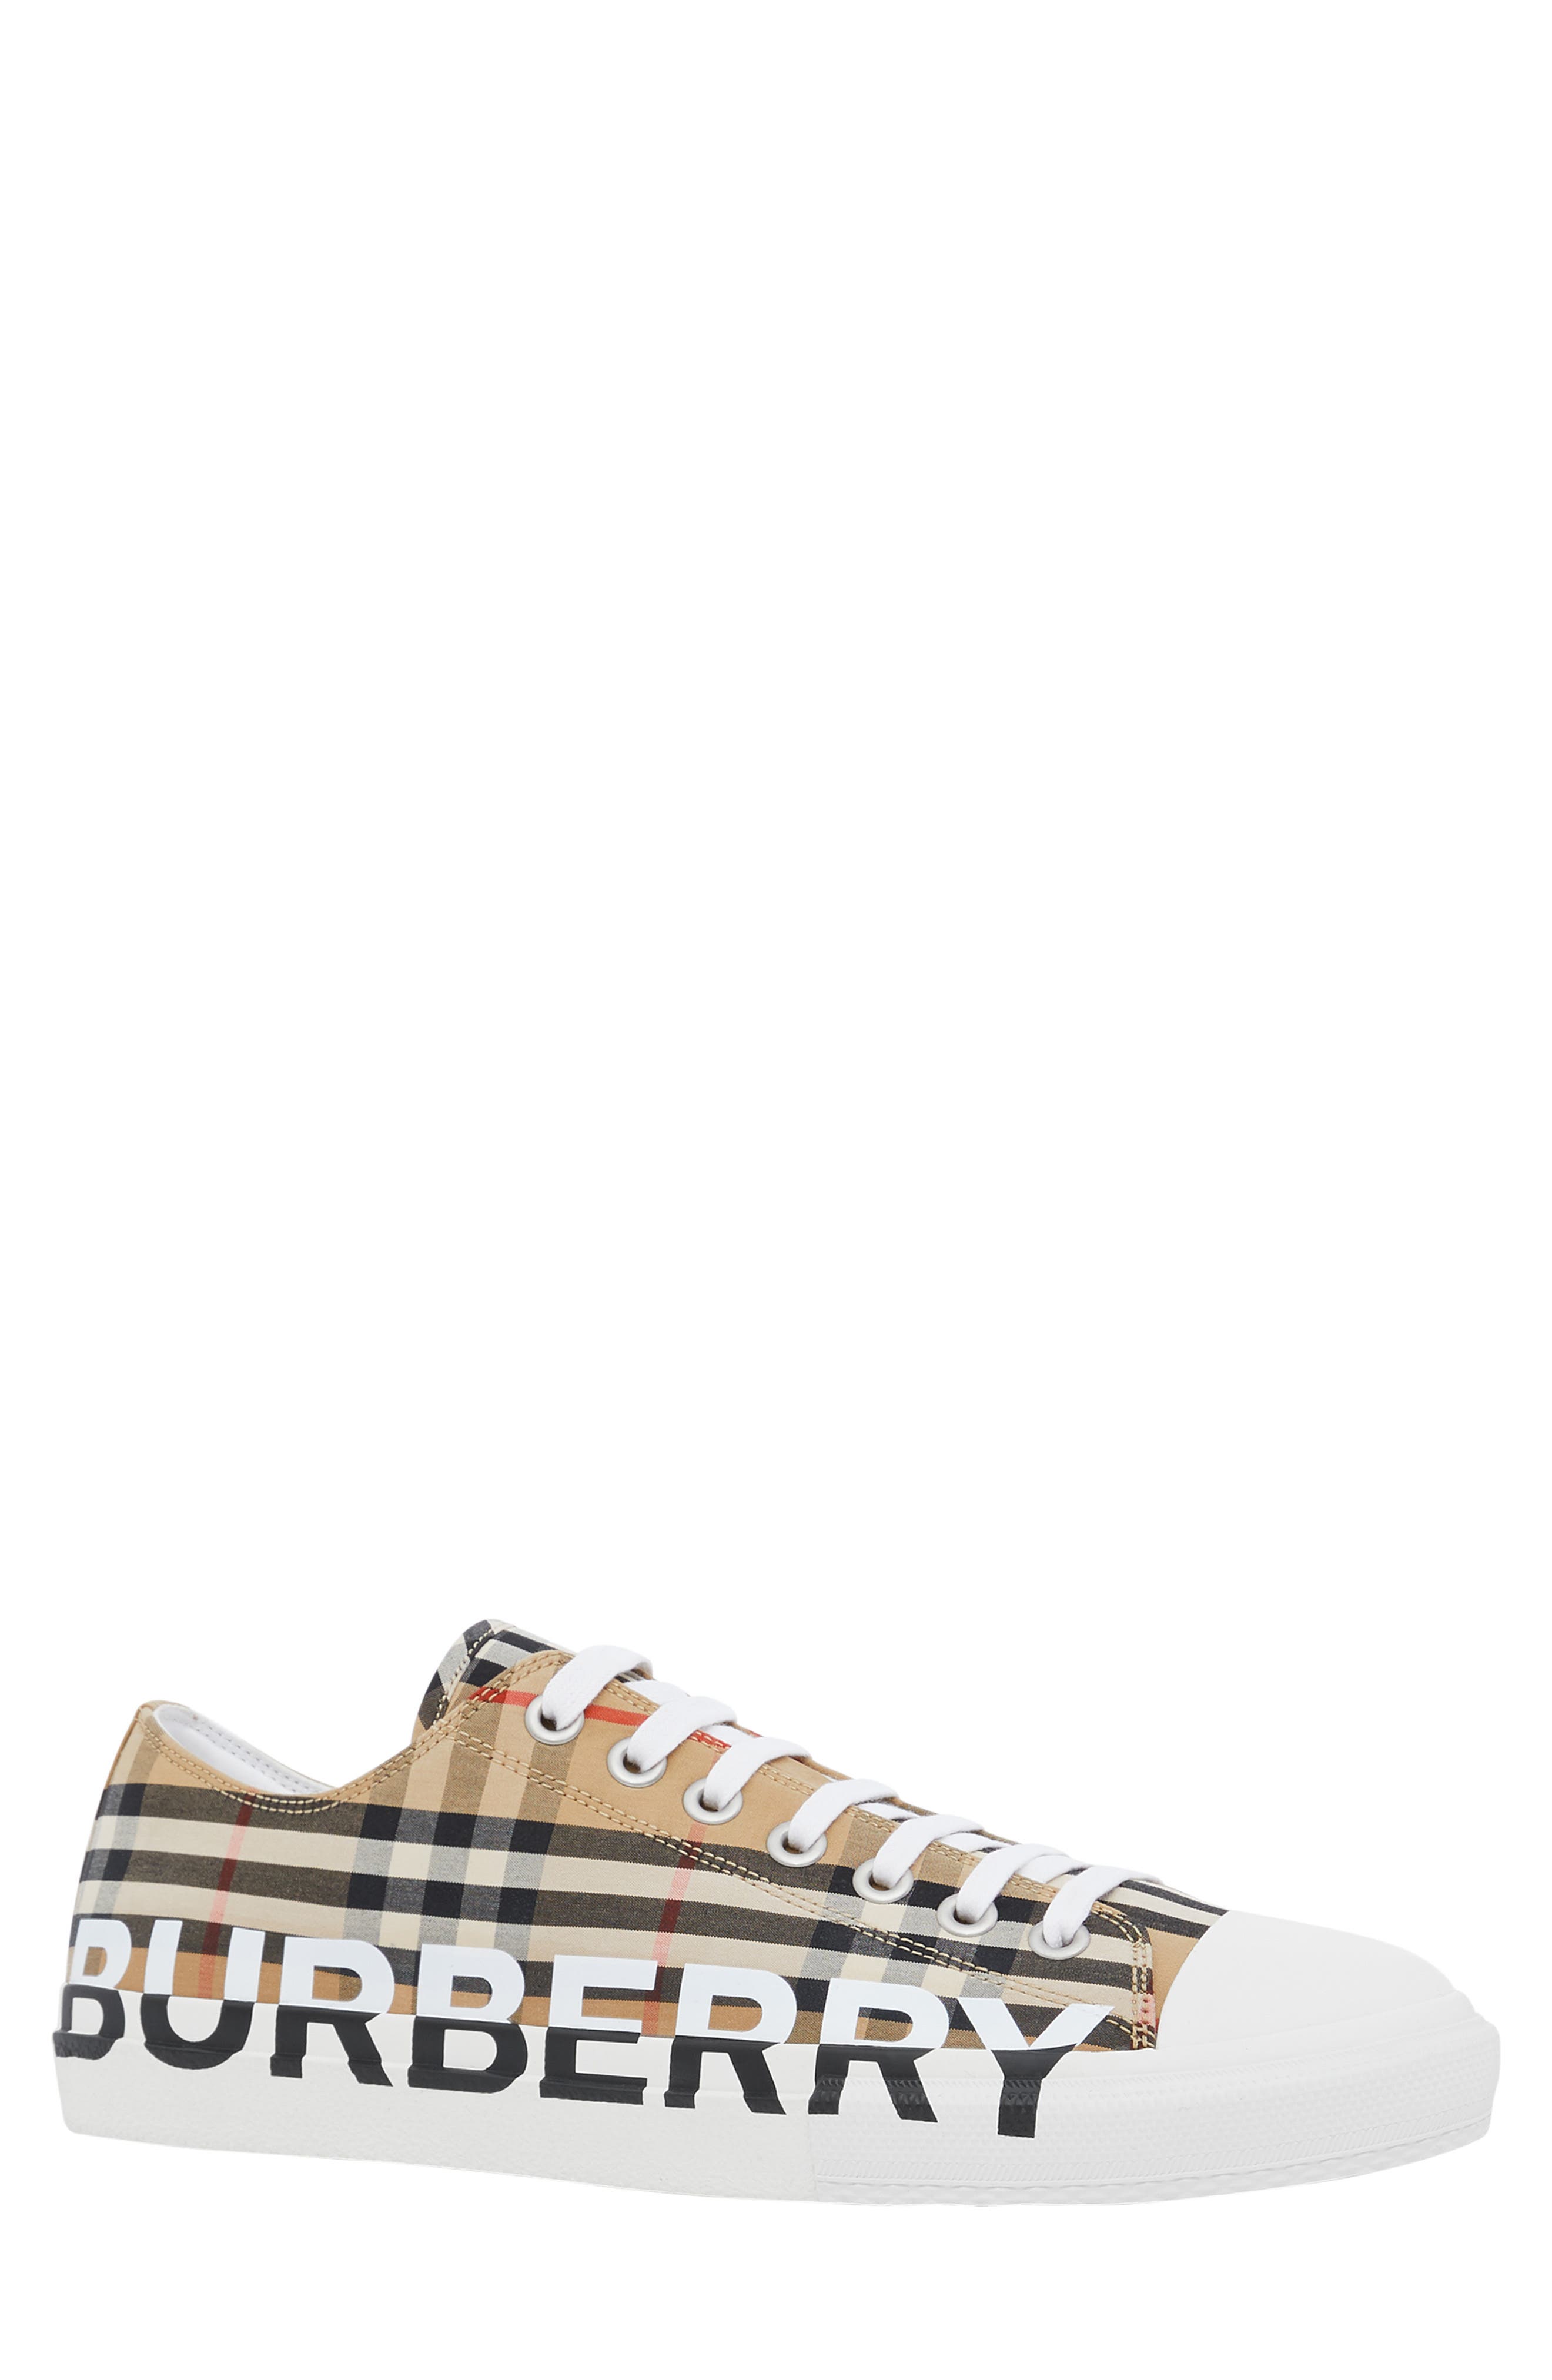 burberry shoes nordstrom